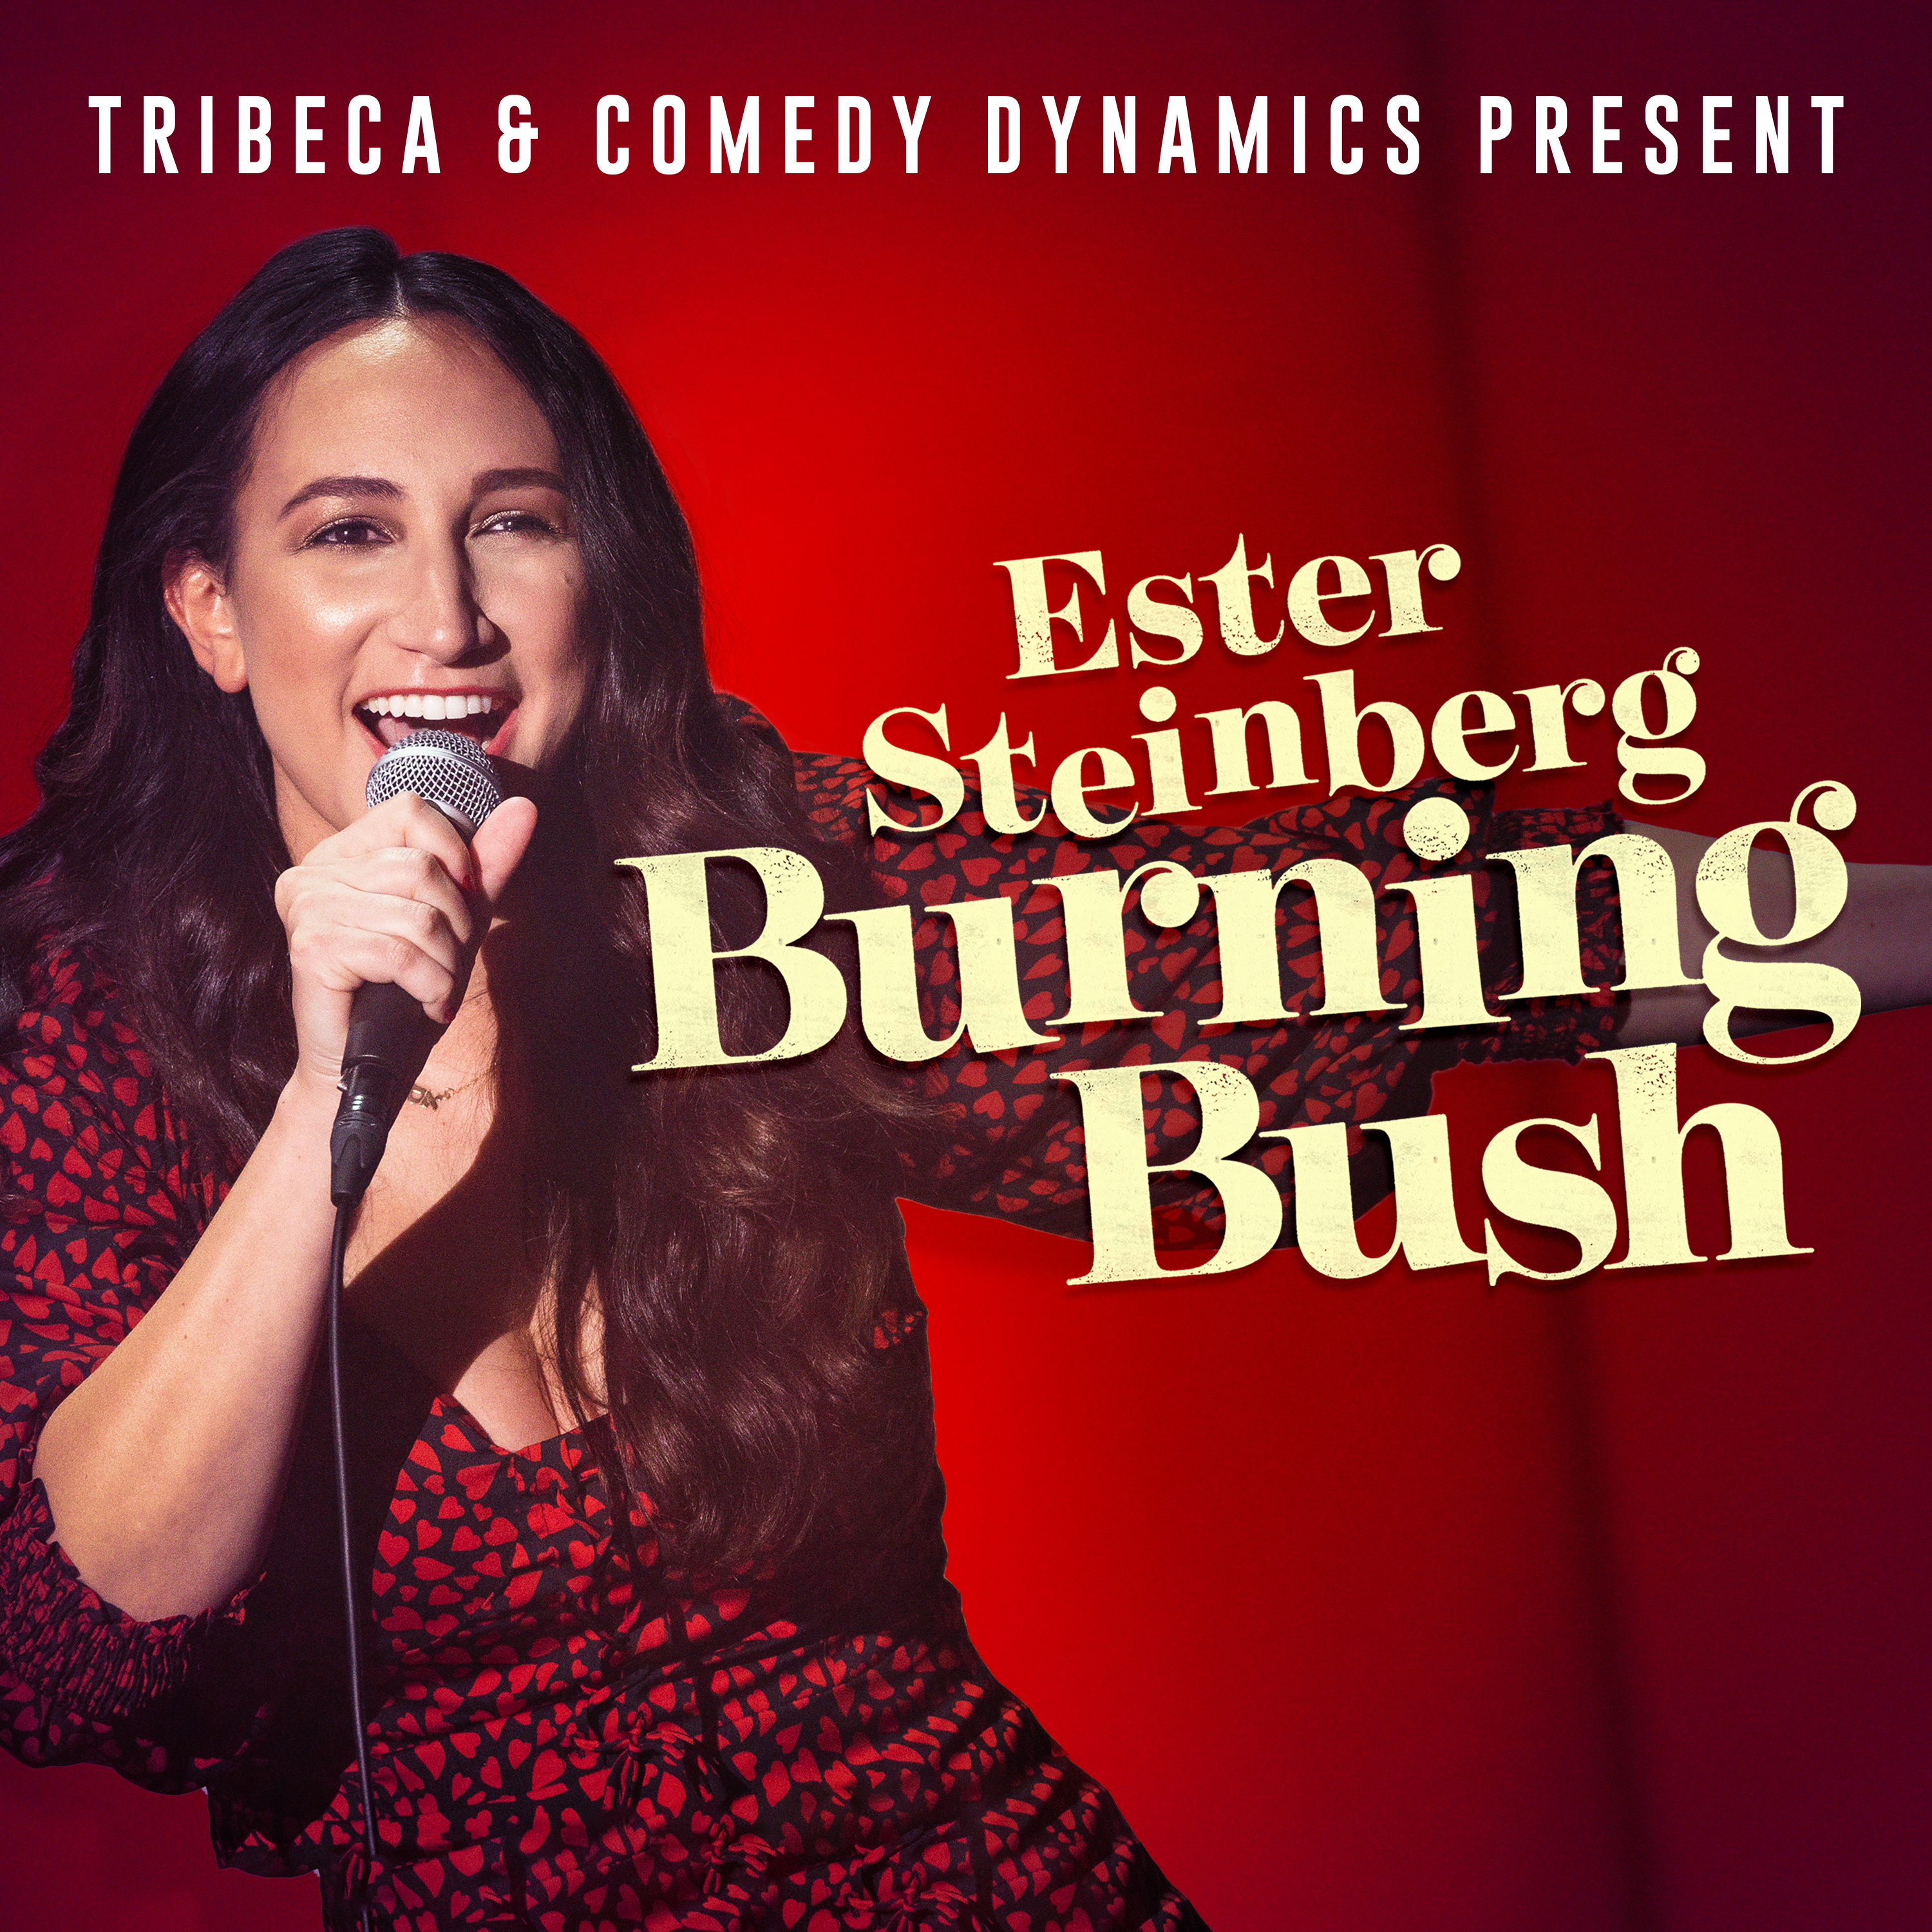 Comedian Ester Steinberg is having a moment and wants Plant Highs attention pic picture